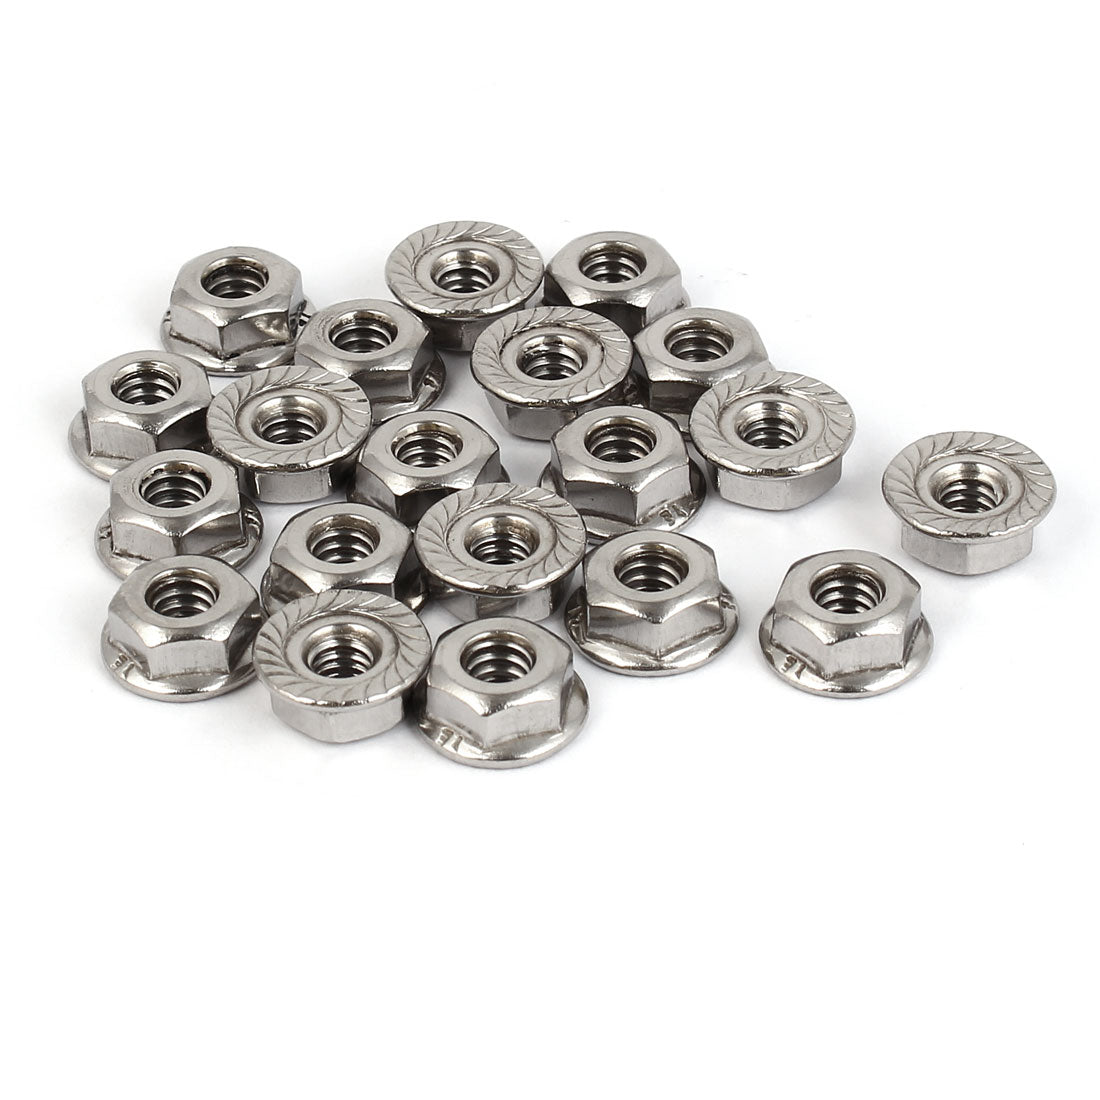 uxcell Uxcell 10#-24 304 Stainless Steel Serrated Flange Hex Machine Screw Lock Nuts 20pcs